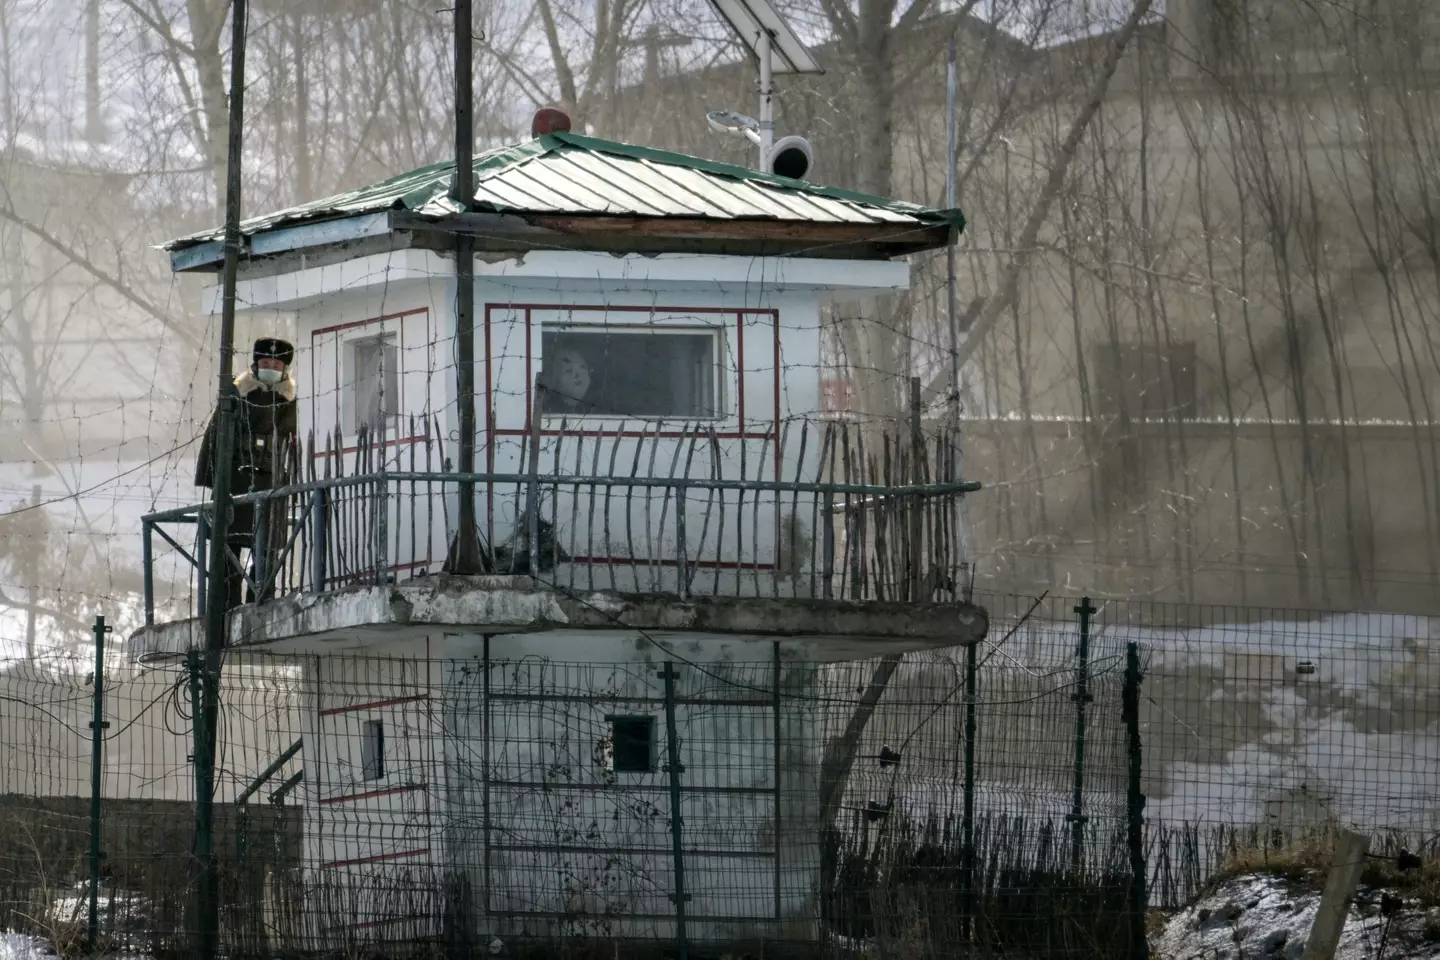 A watchtower on the border in the North Korean village of Hyesan.